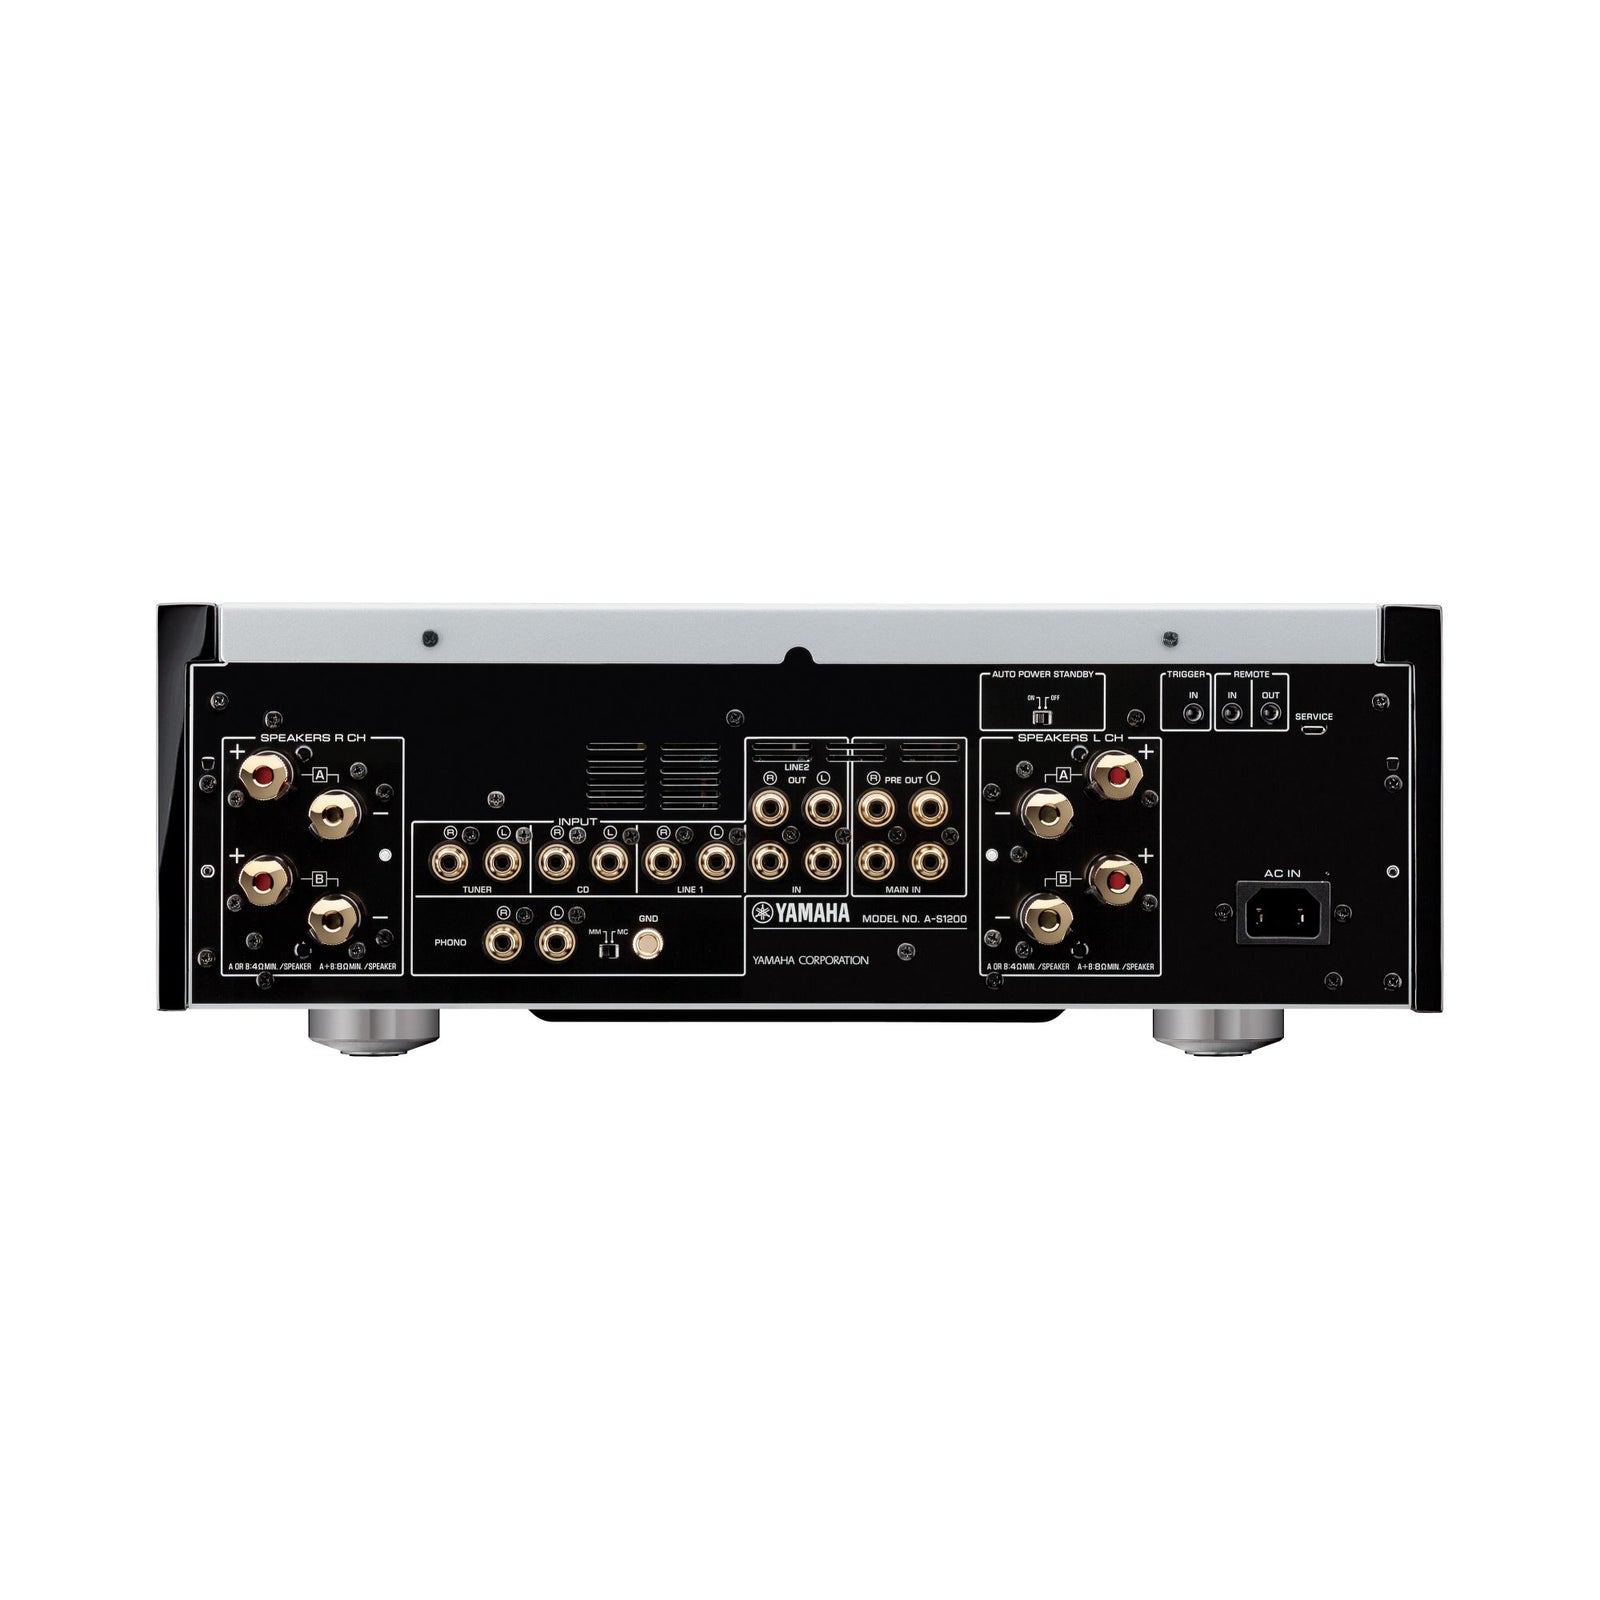 YAMAHA A-S1200 - INTEGRATED AMPLIFIER | VINYL SOUND acknowledging the golden era of Hi-Fi with the level meters and beautiful design, the A-S1200 boasts an impressive array of the latest technology to accurately deliver an emotional, purely musical sound. High Quality Components delivering exceptional musical expression